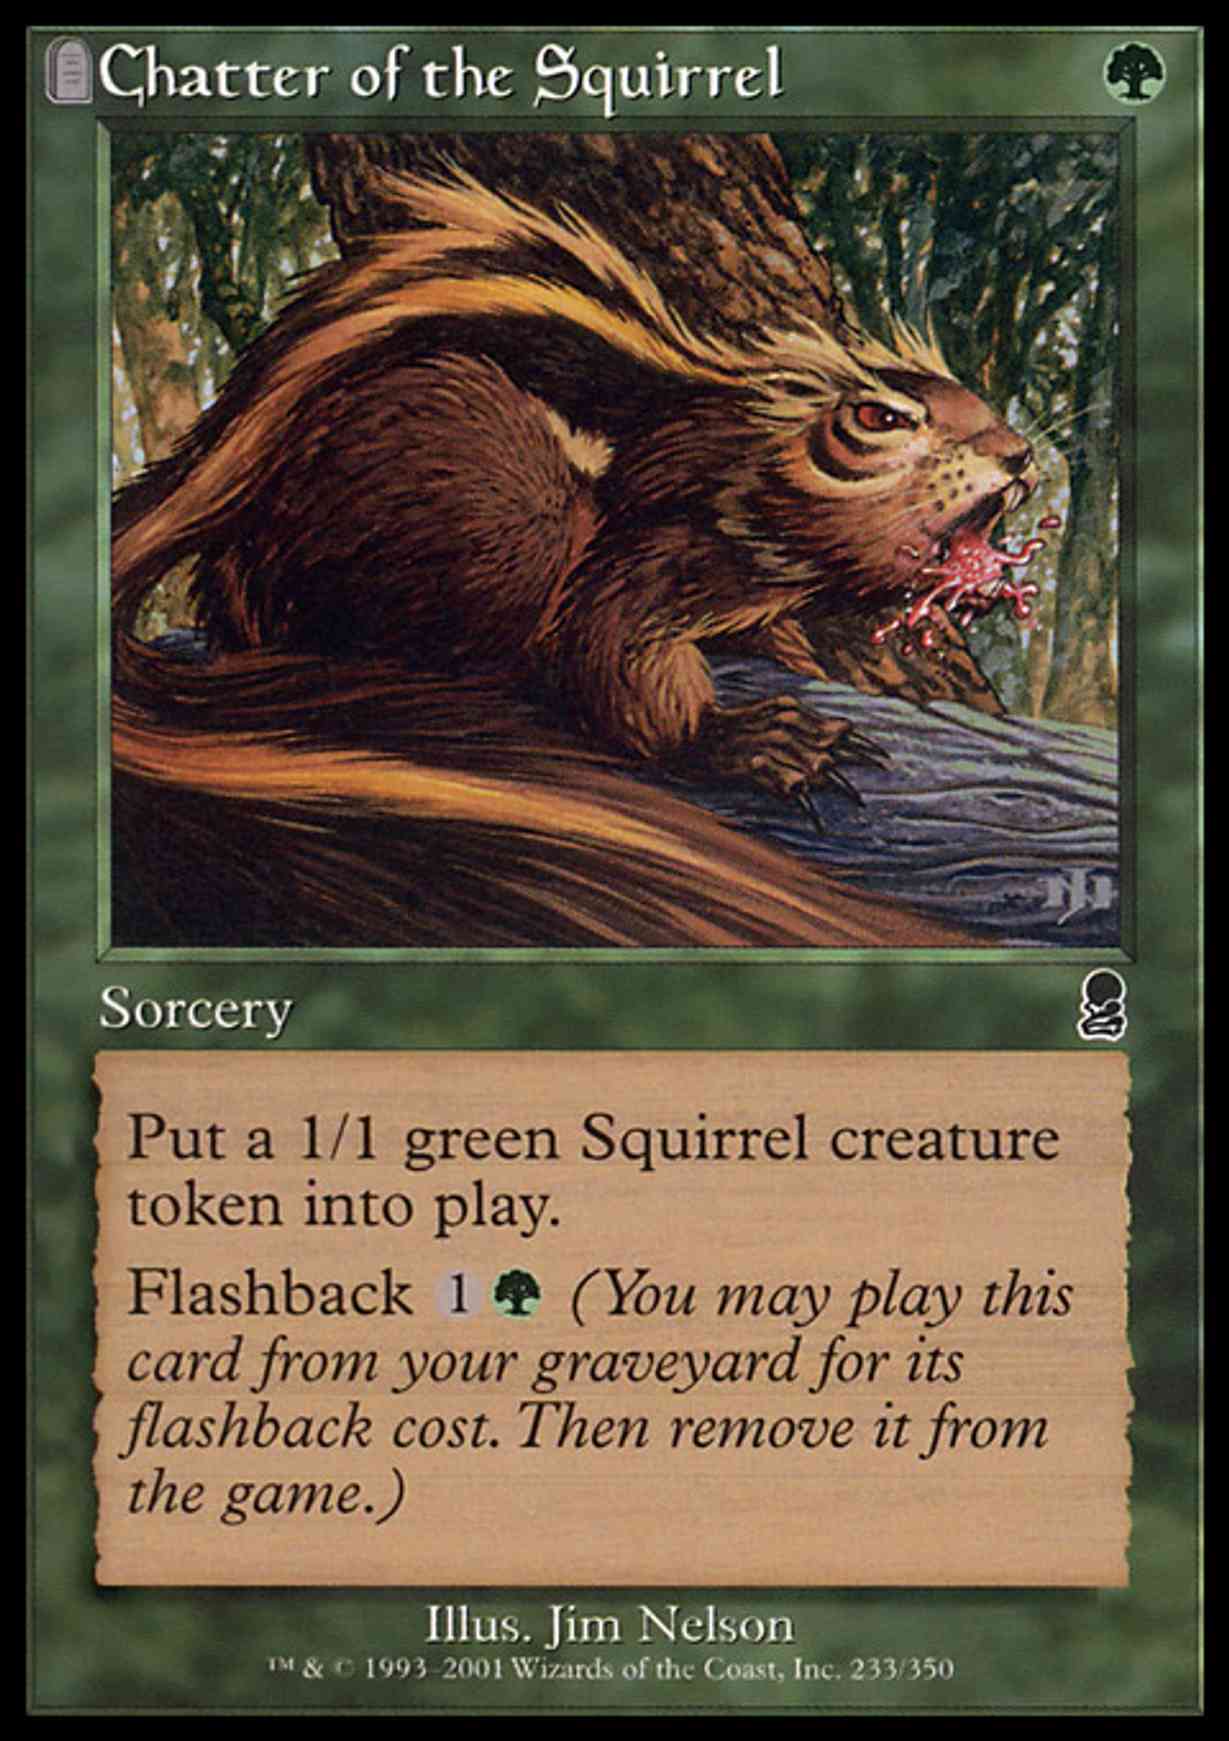 Chatter of the Squirrel magic card front